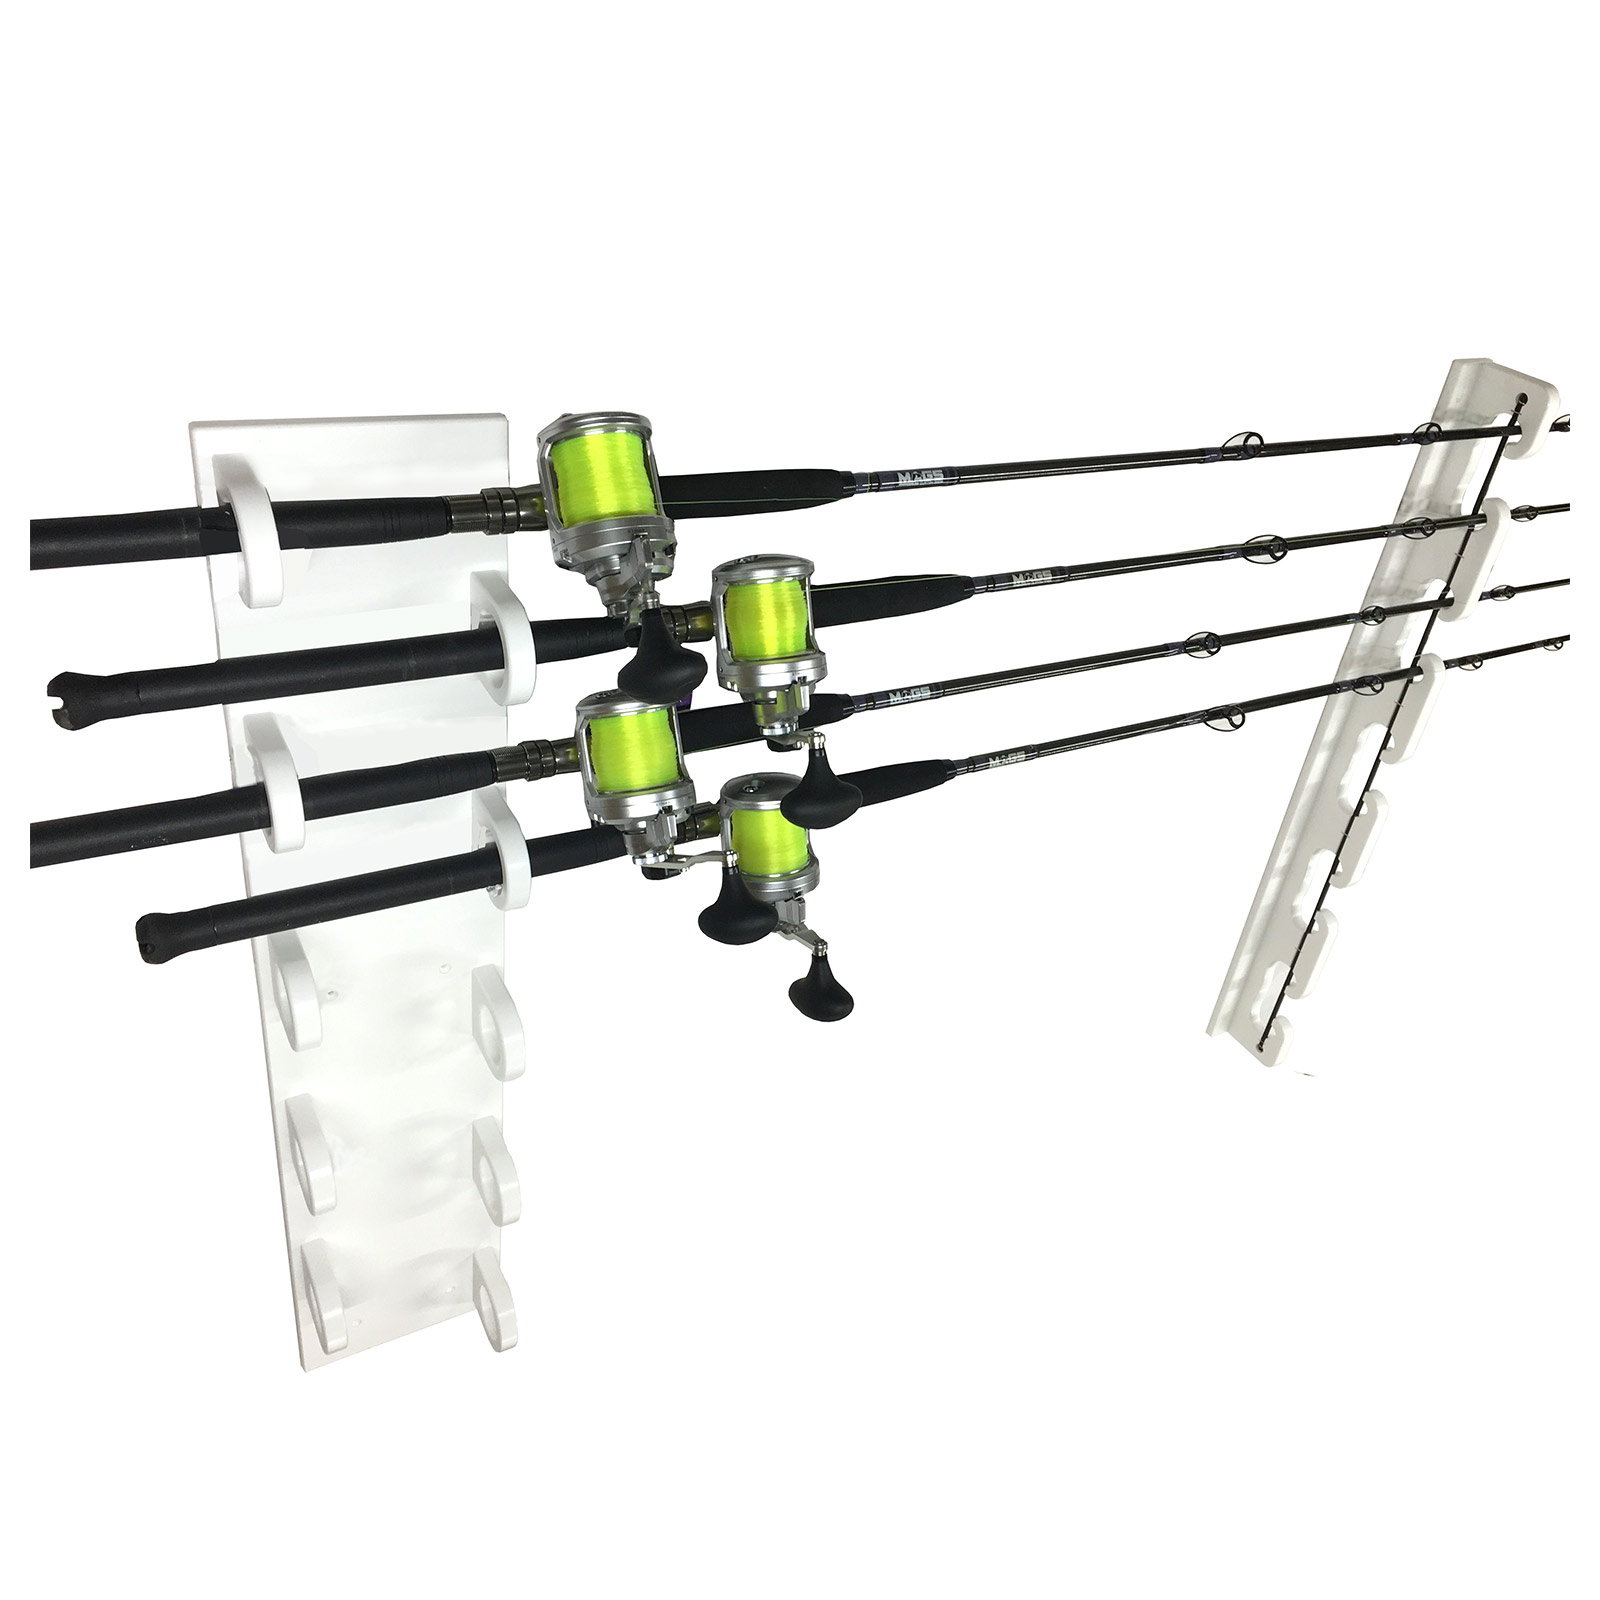 Ceiling Mount Big Game Rod Holder For 10 Fishing Rods and Reels